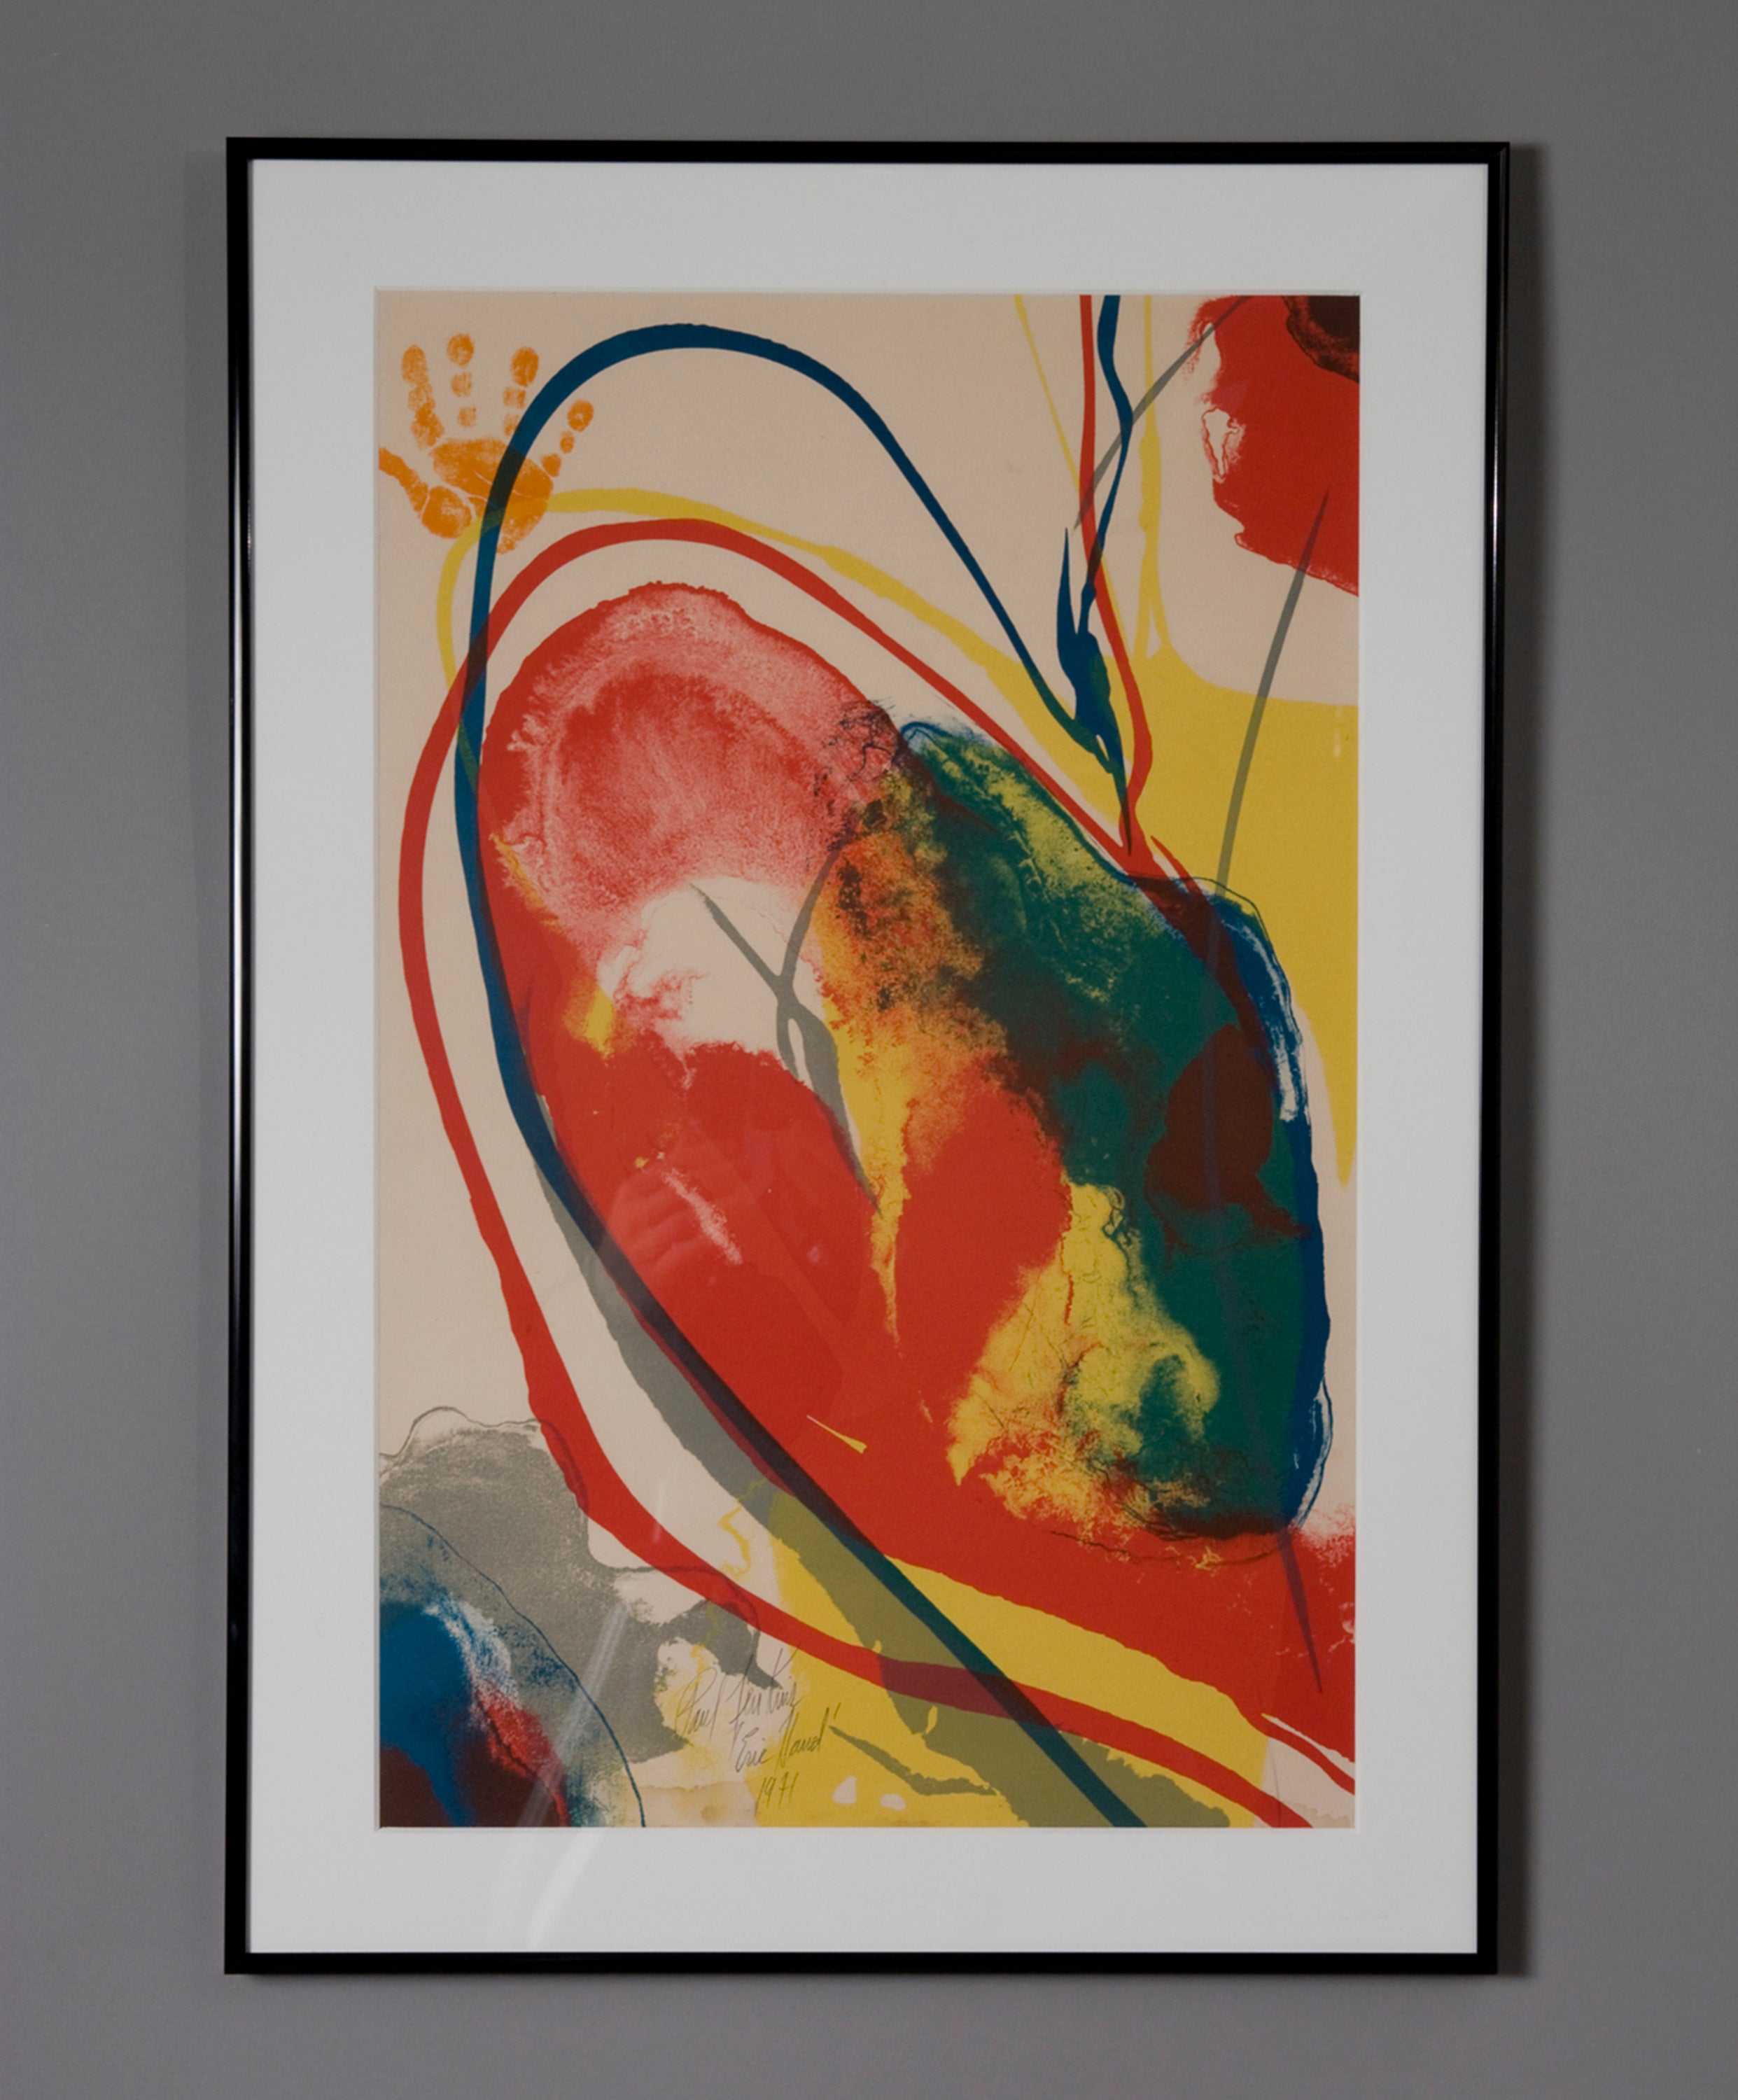 Colorful Abstract Lithograph by Paul Jenkins